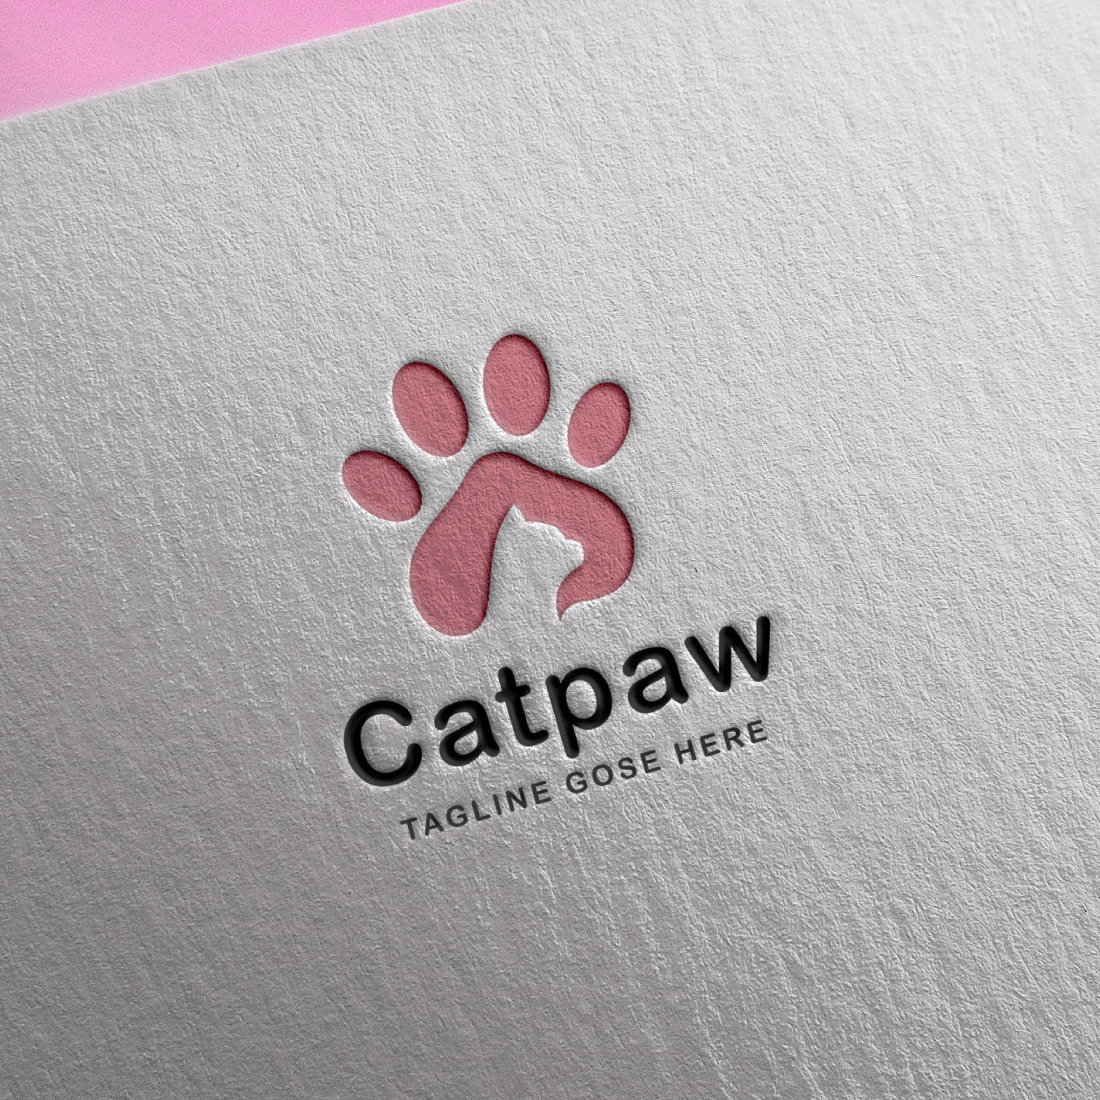 Cat Paw logo template cover image.